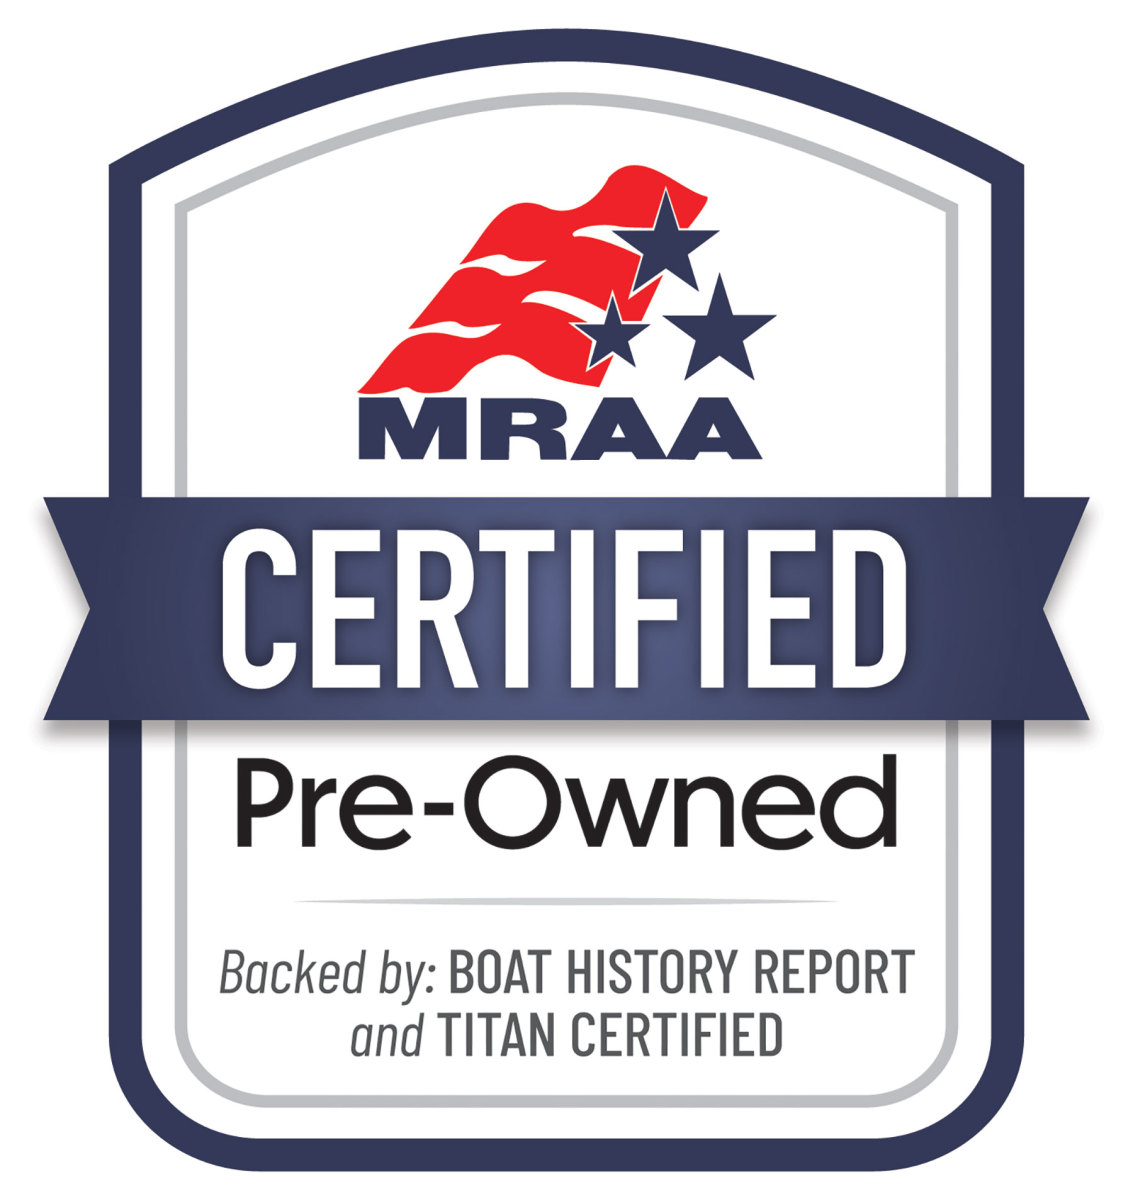 The MRAA logo is something boat buyers should see at future boat shows.